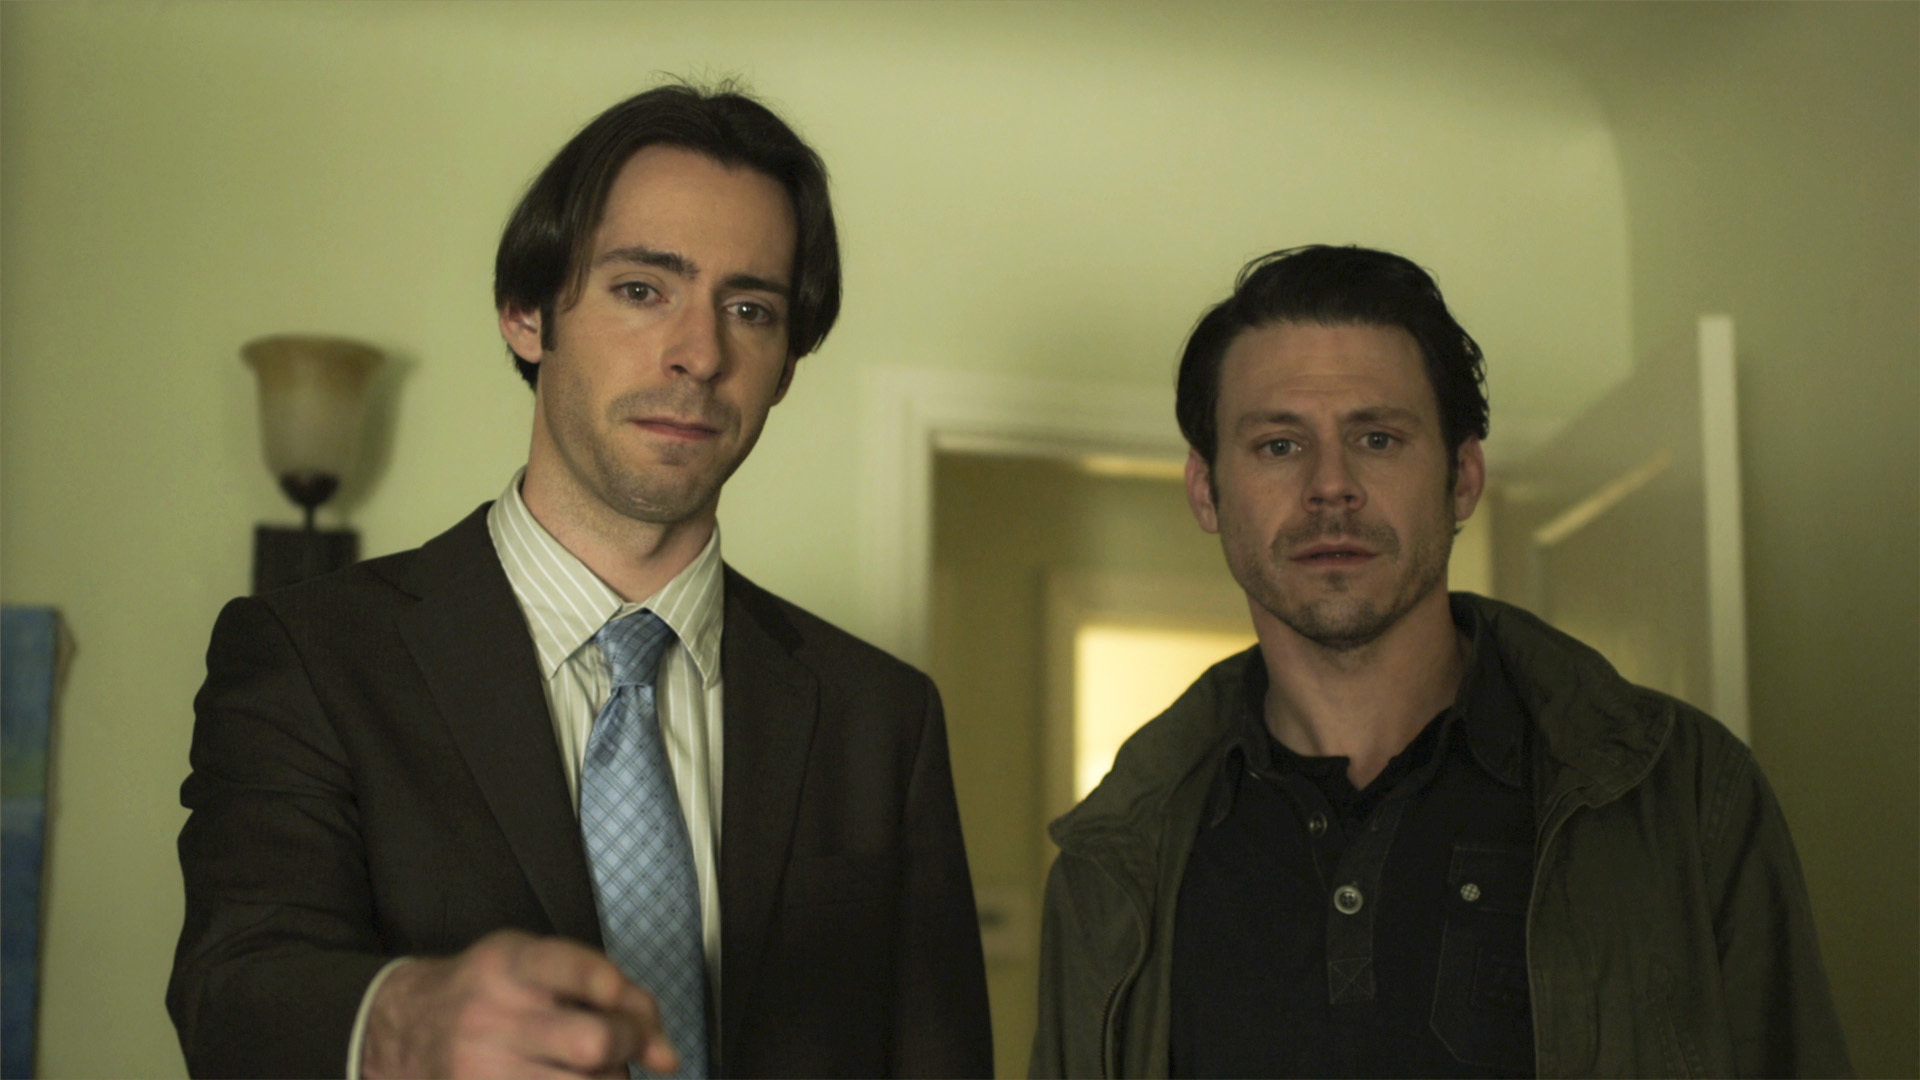 Martin Starr and Blayne Weaver in 6 Month Rule (2011)